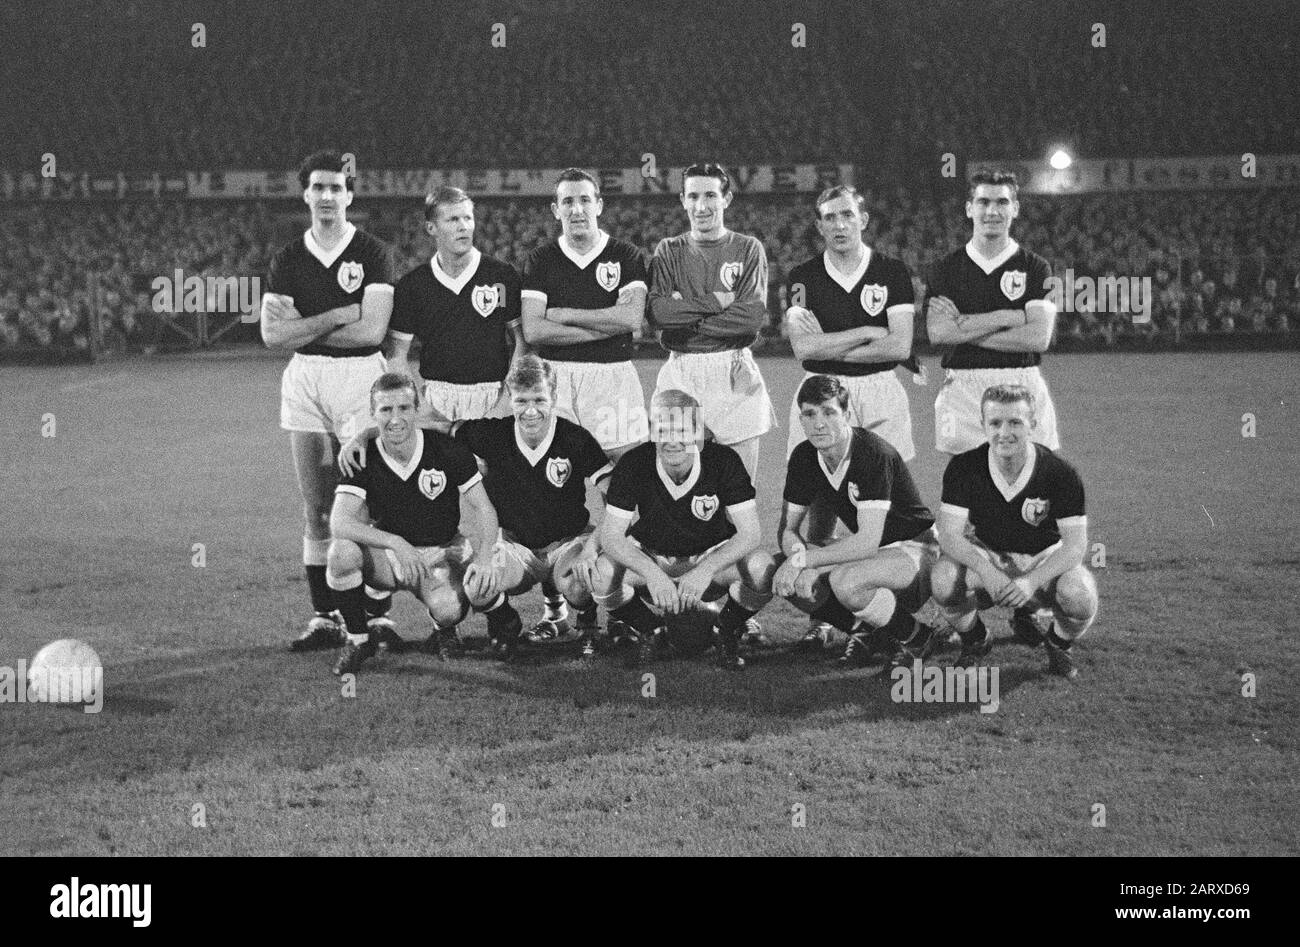 Tottenham Hotspur team European Cup primo round 1961, giocando a Feyenoord da sinistra a destra - back row - Maurice Norman, Peter Baker , Tony marchi , Bill Brown , Danny Blanchflower , Ron Henry front - Cliff Jones , John White , Frank Saulo , Bobby Smith , Terry Dyson; Foto Stock